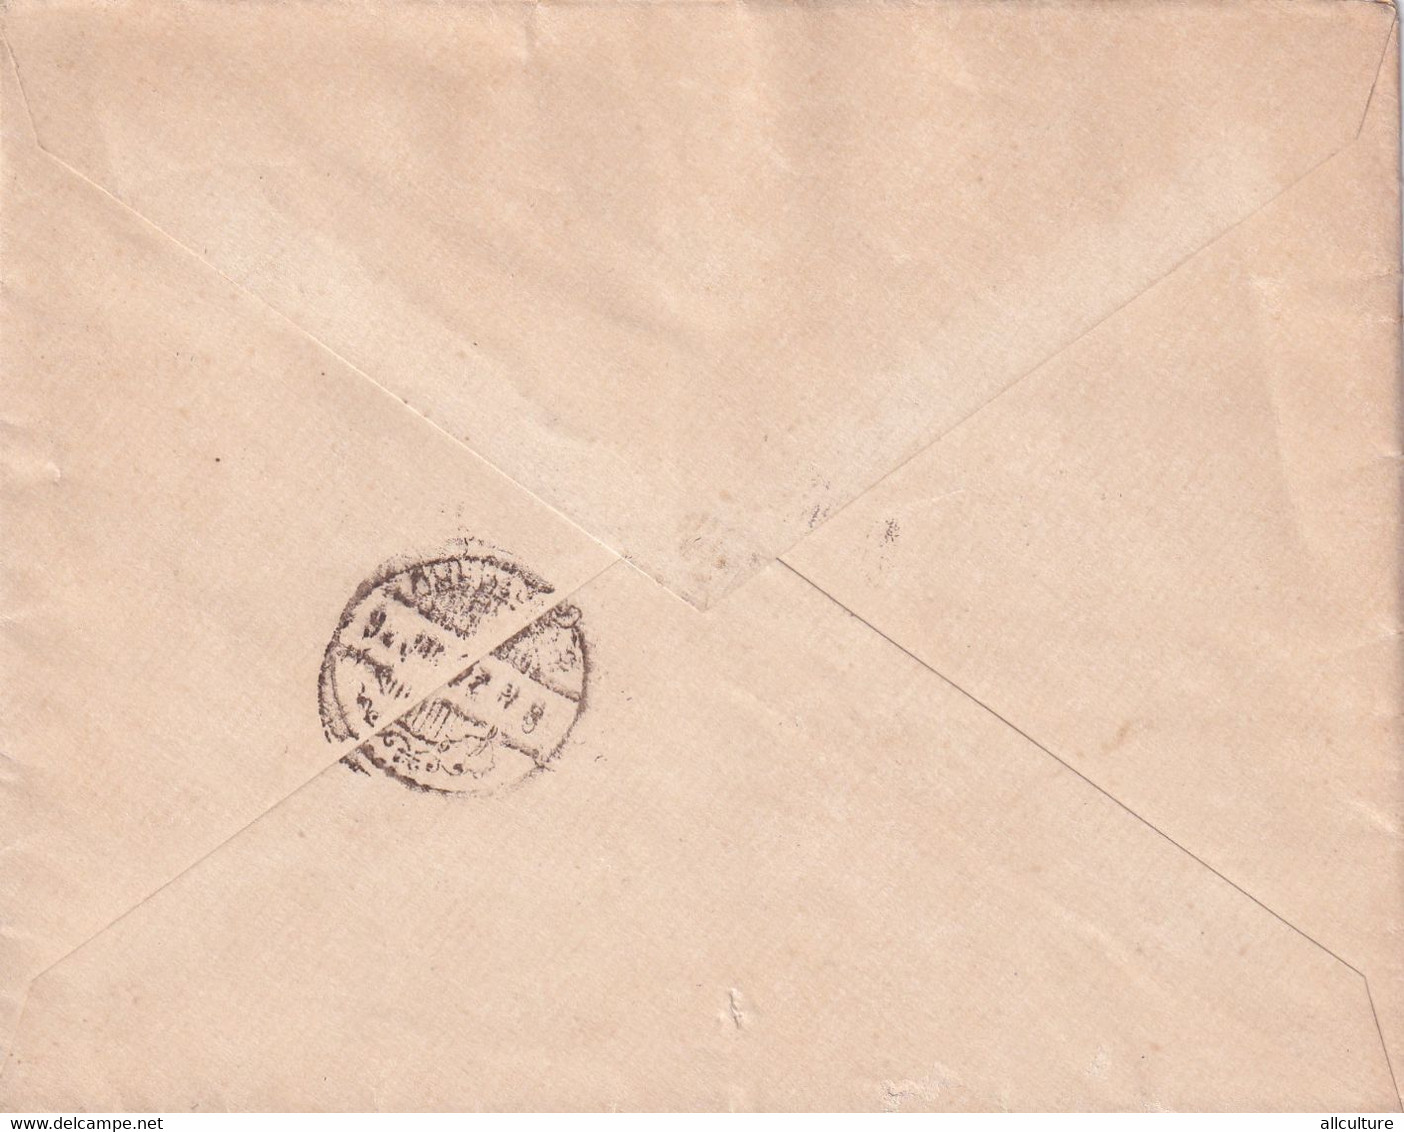 A8483- LETTER  FROM SZAMOS-UJVAR CLUJ ROMANIA TO KOLOZSVAR STAMP ON COVER 1892 MAGYAR POSTA USED - Covers & Documents